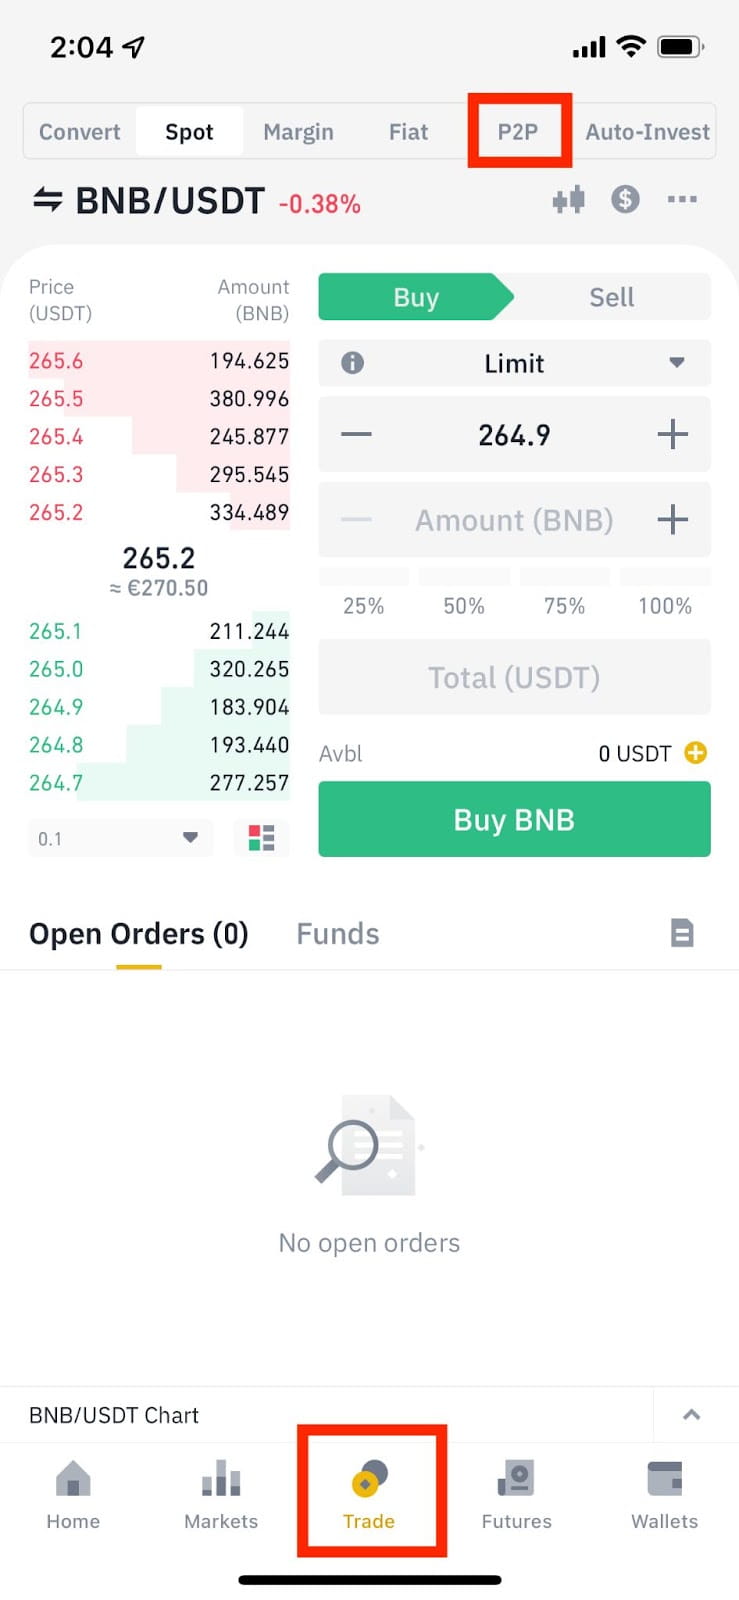 How To Buy On Binance - Complete Step-by-Step Guide ()